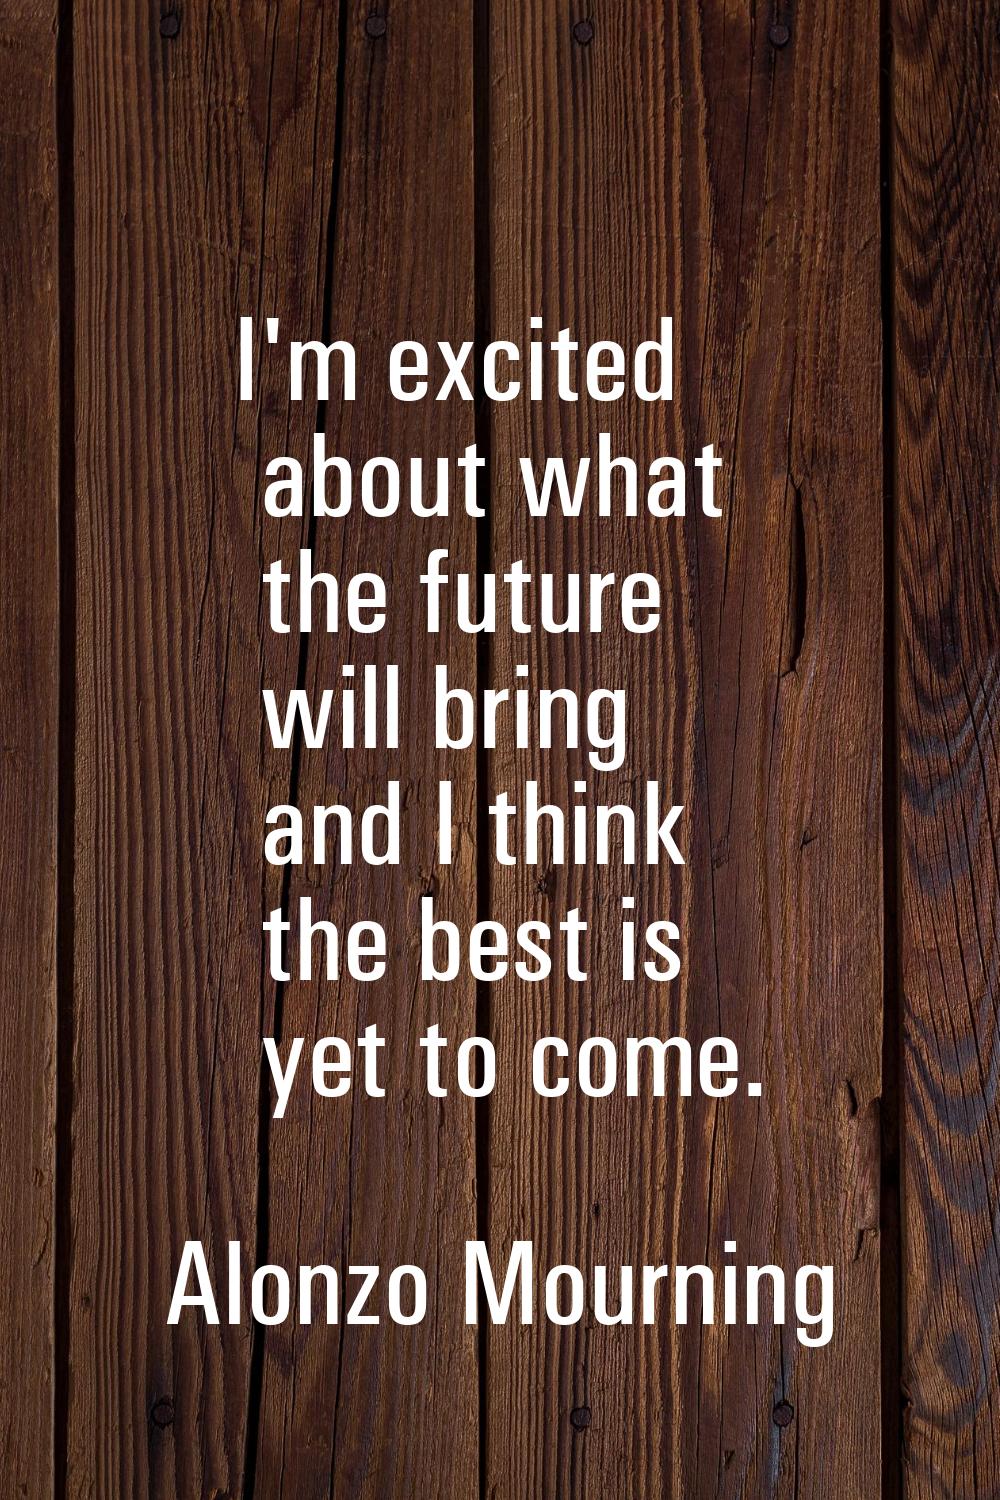 I'm excited about what the future will bring and I think the best is yet to come.